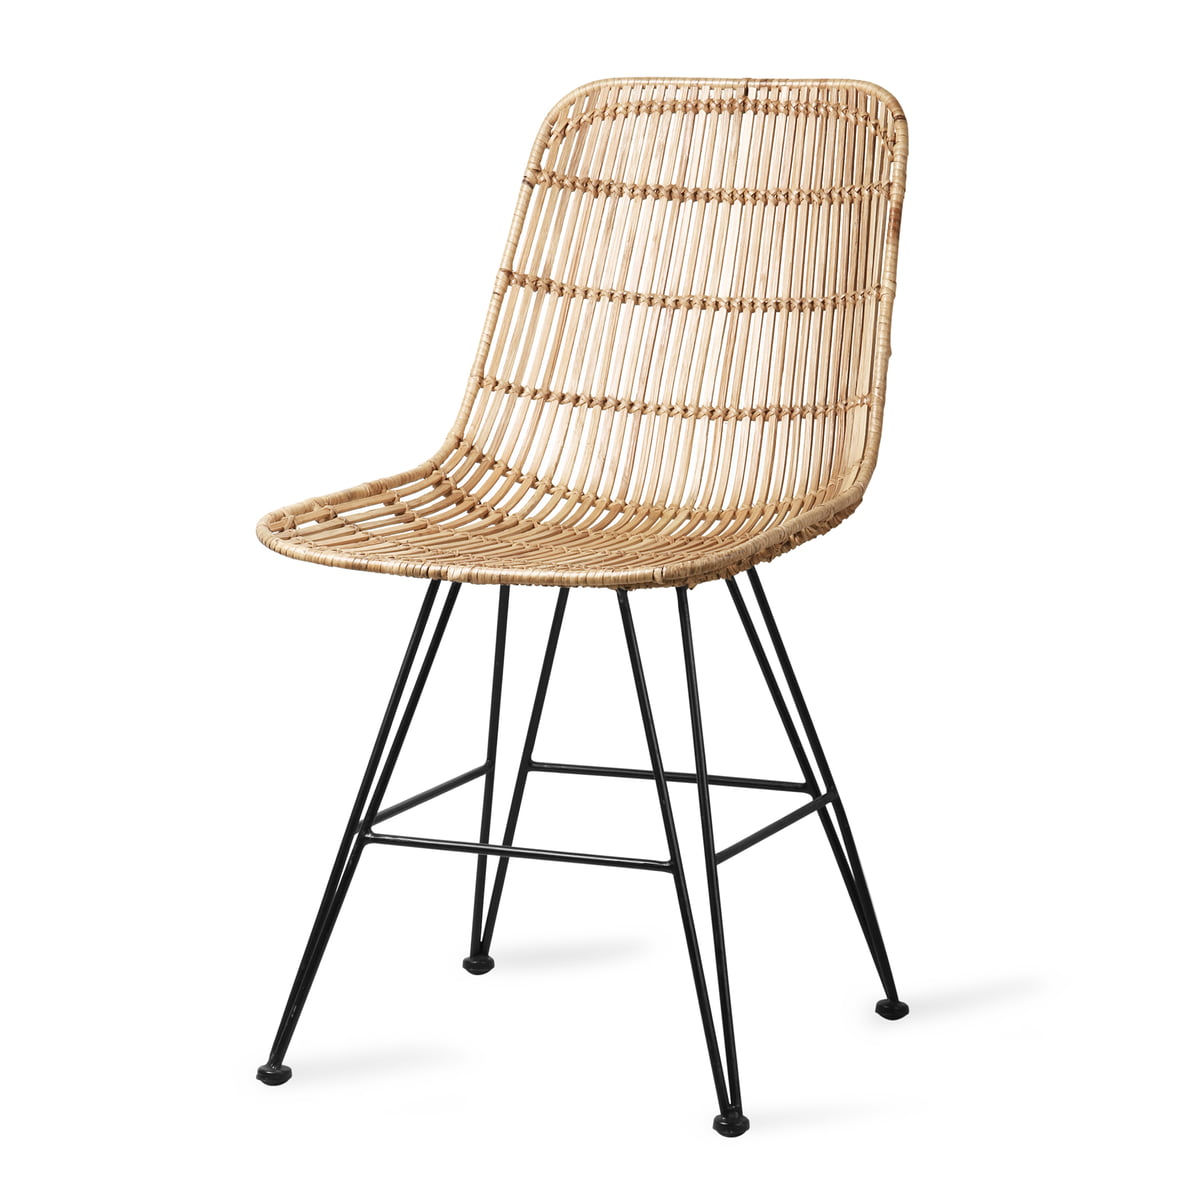 Hkliving - Rattan dining chair | Connox